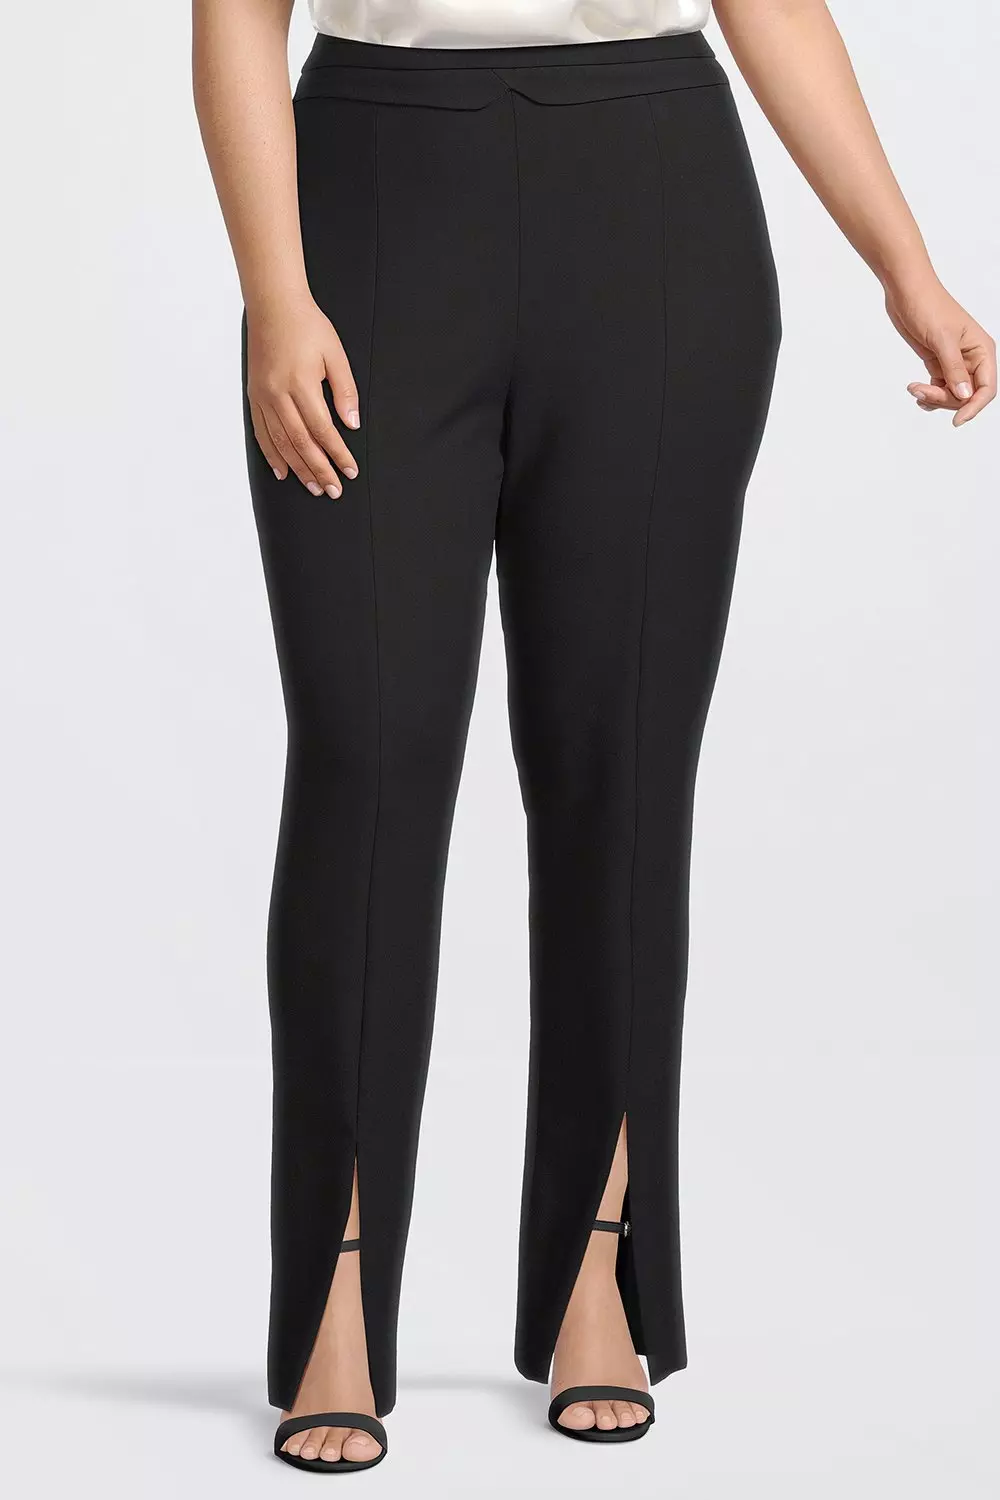 The Tailored Ponte Work Pant  Women's Sustainable Work Pant